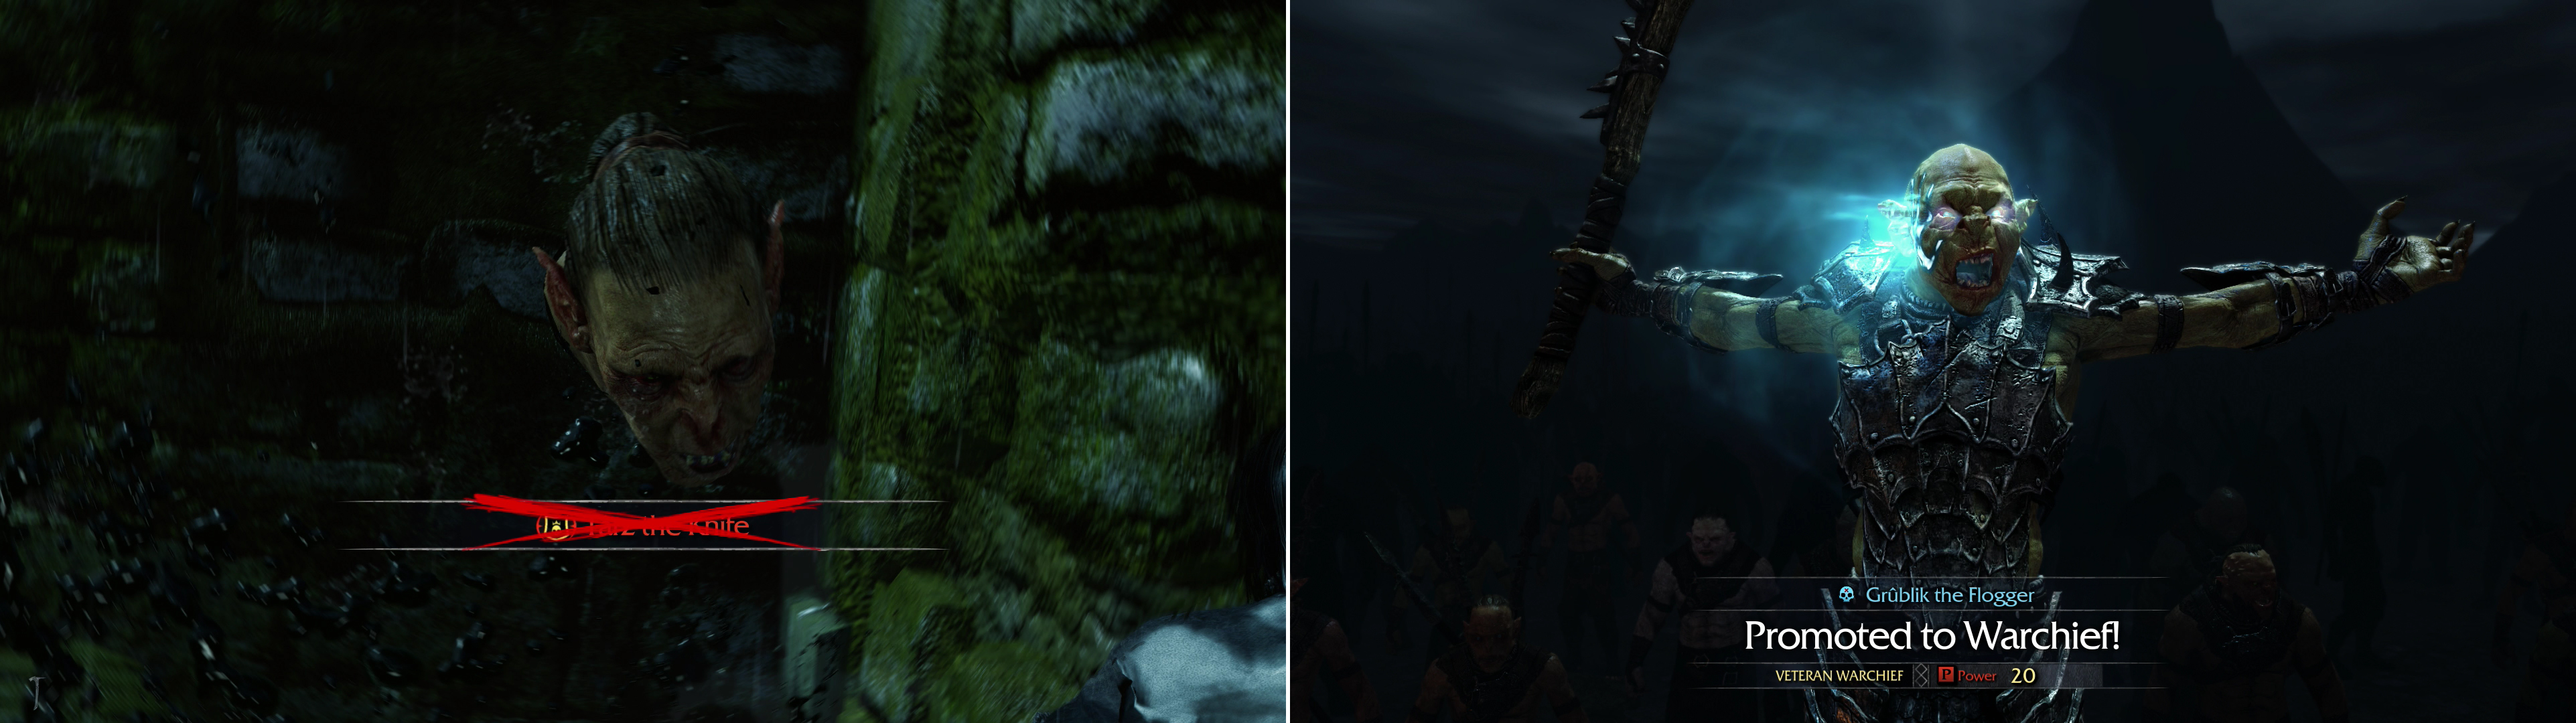 Help Grublik overthrow his Warchief (left) so that your branded servant can take his place (right).